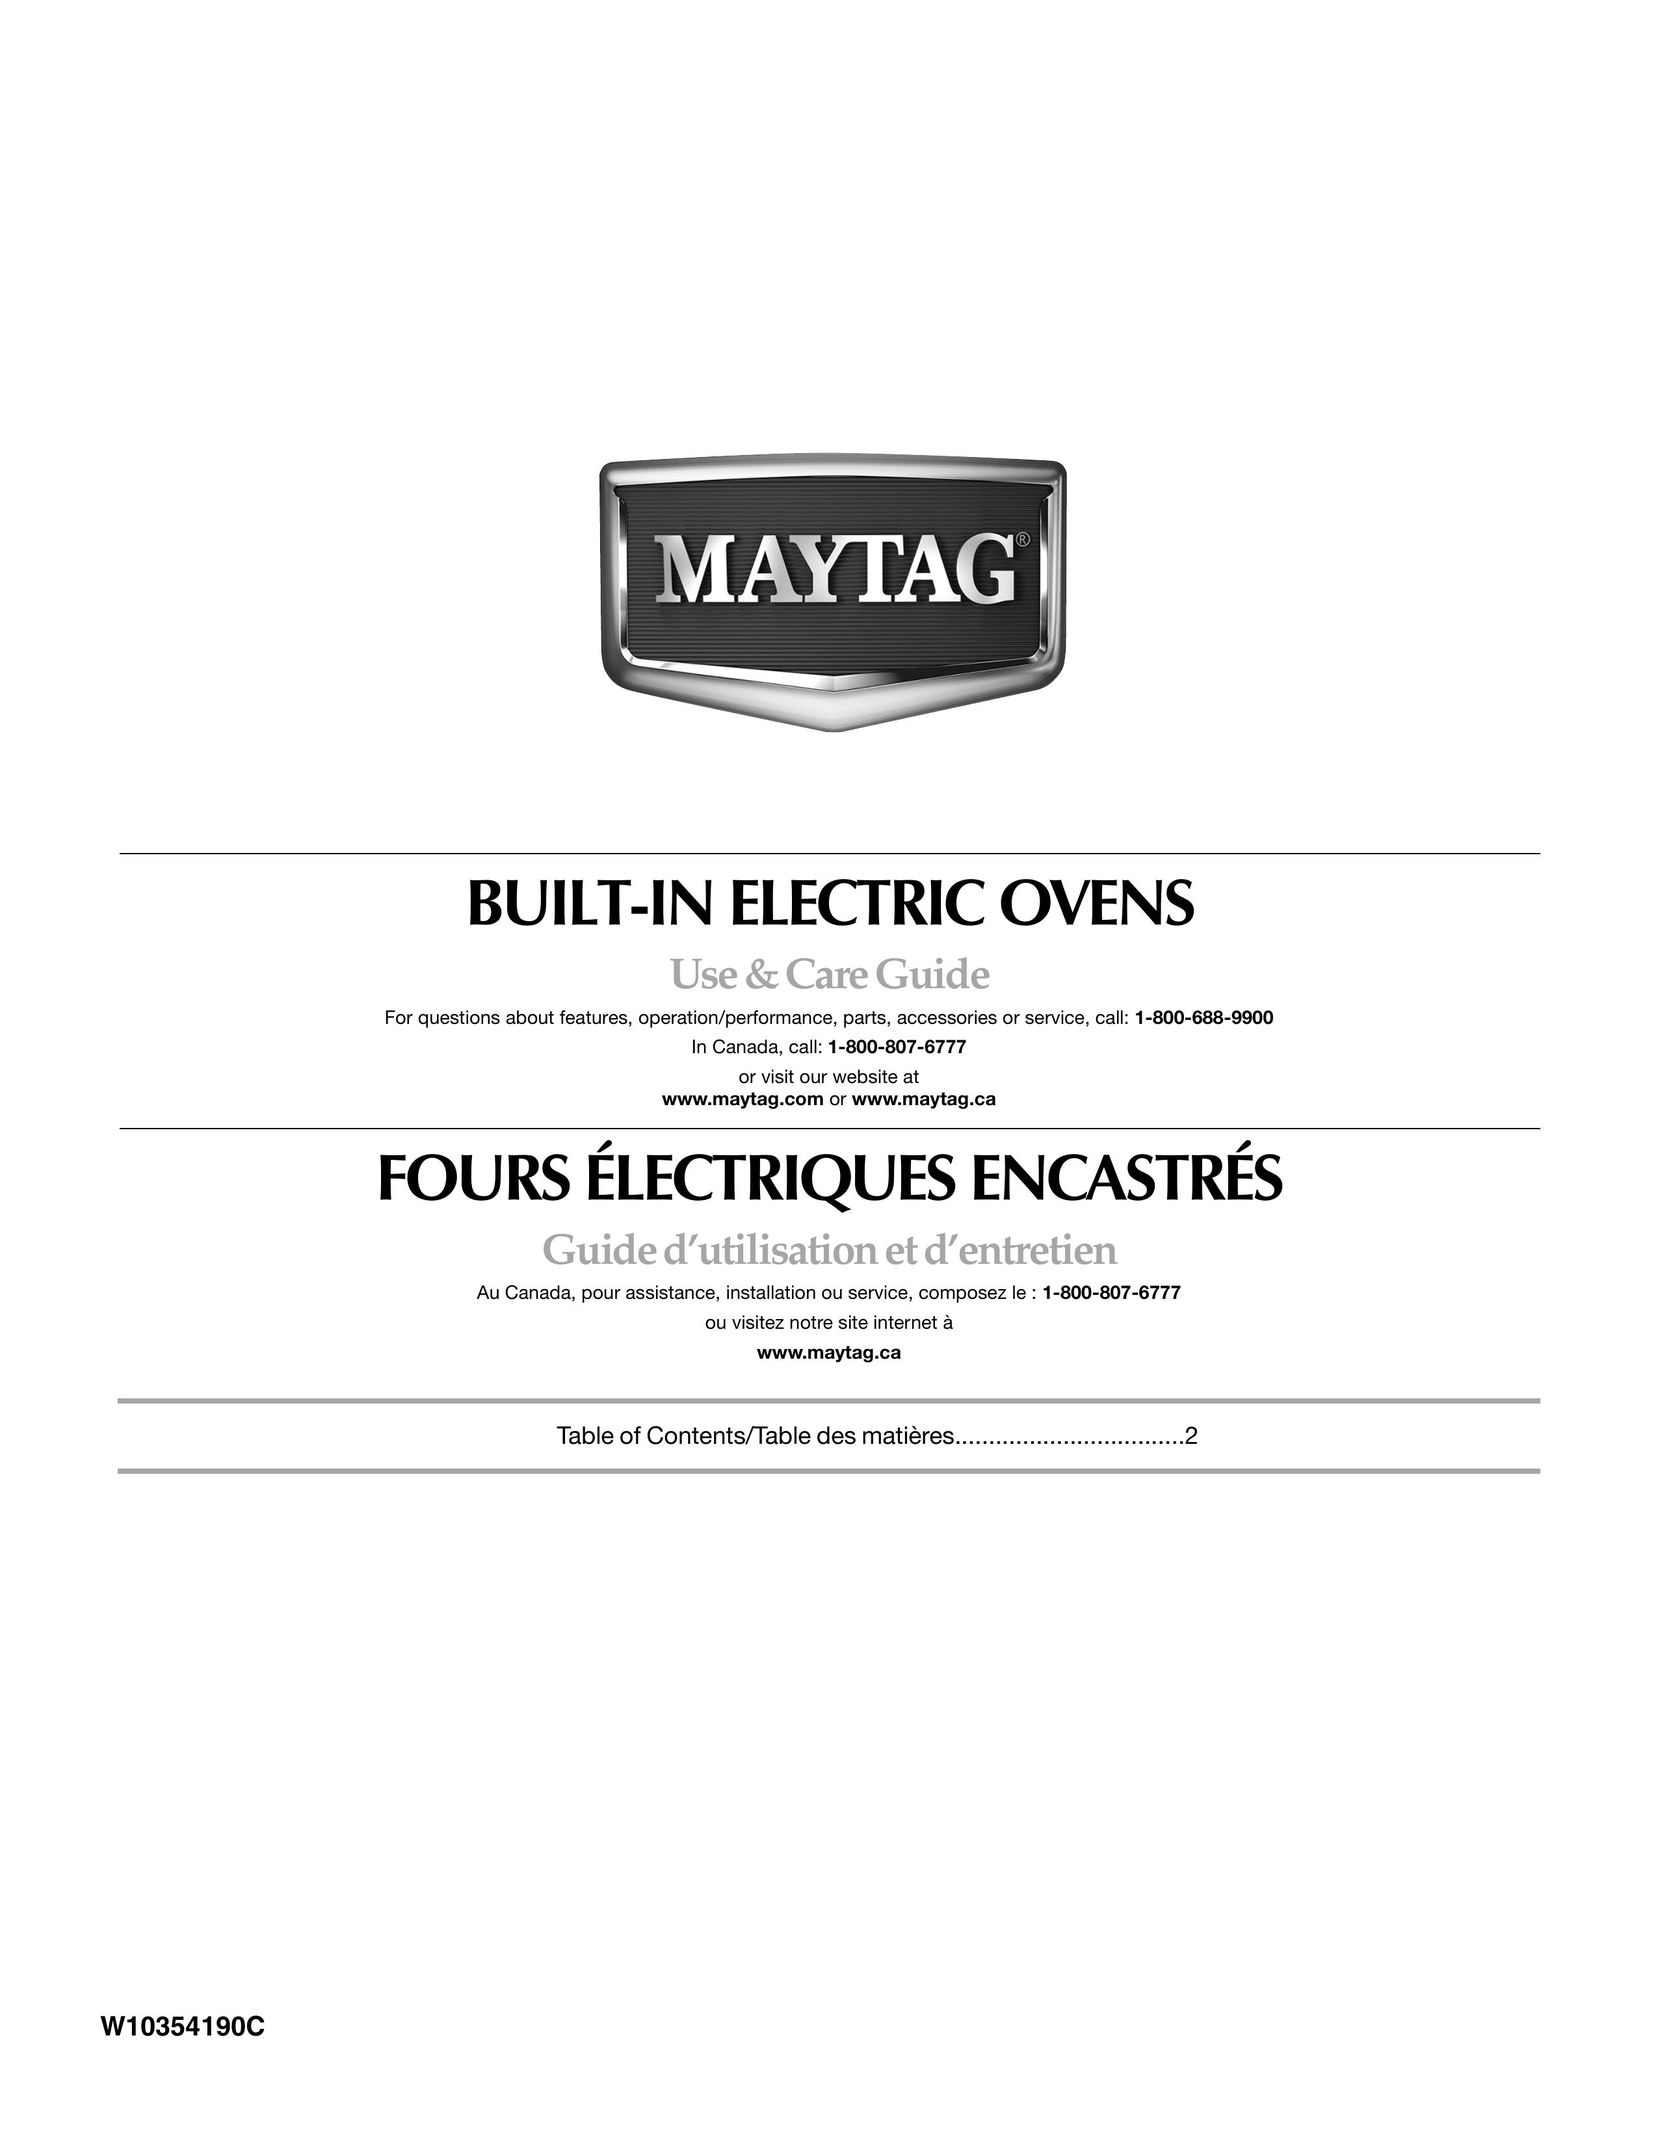 Maytag W10354190C Oven User Manual